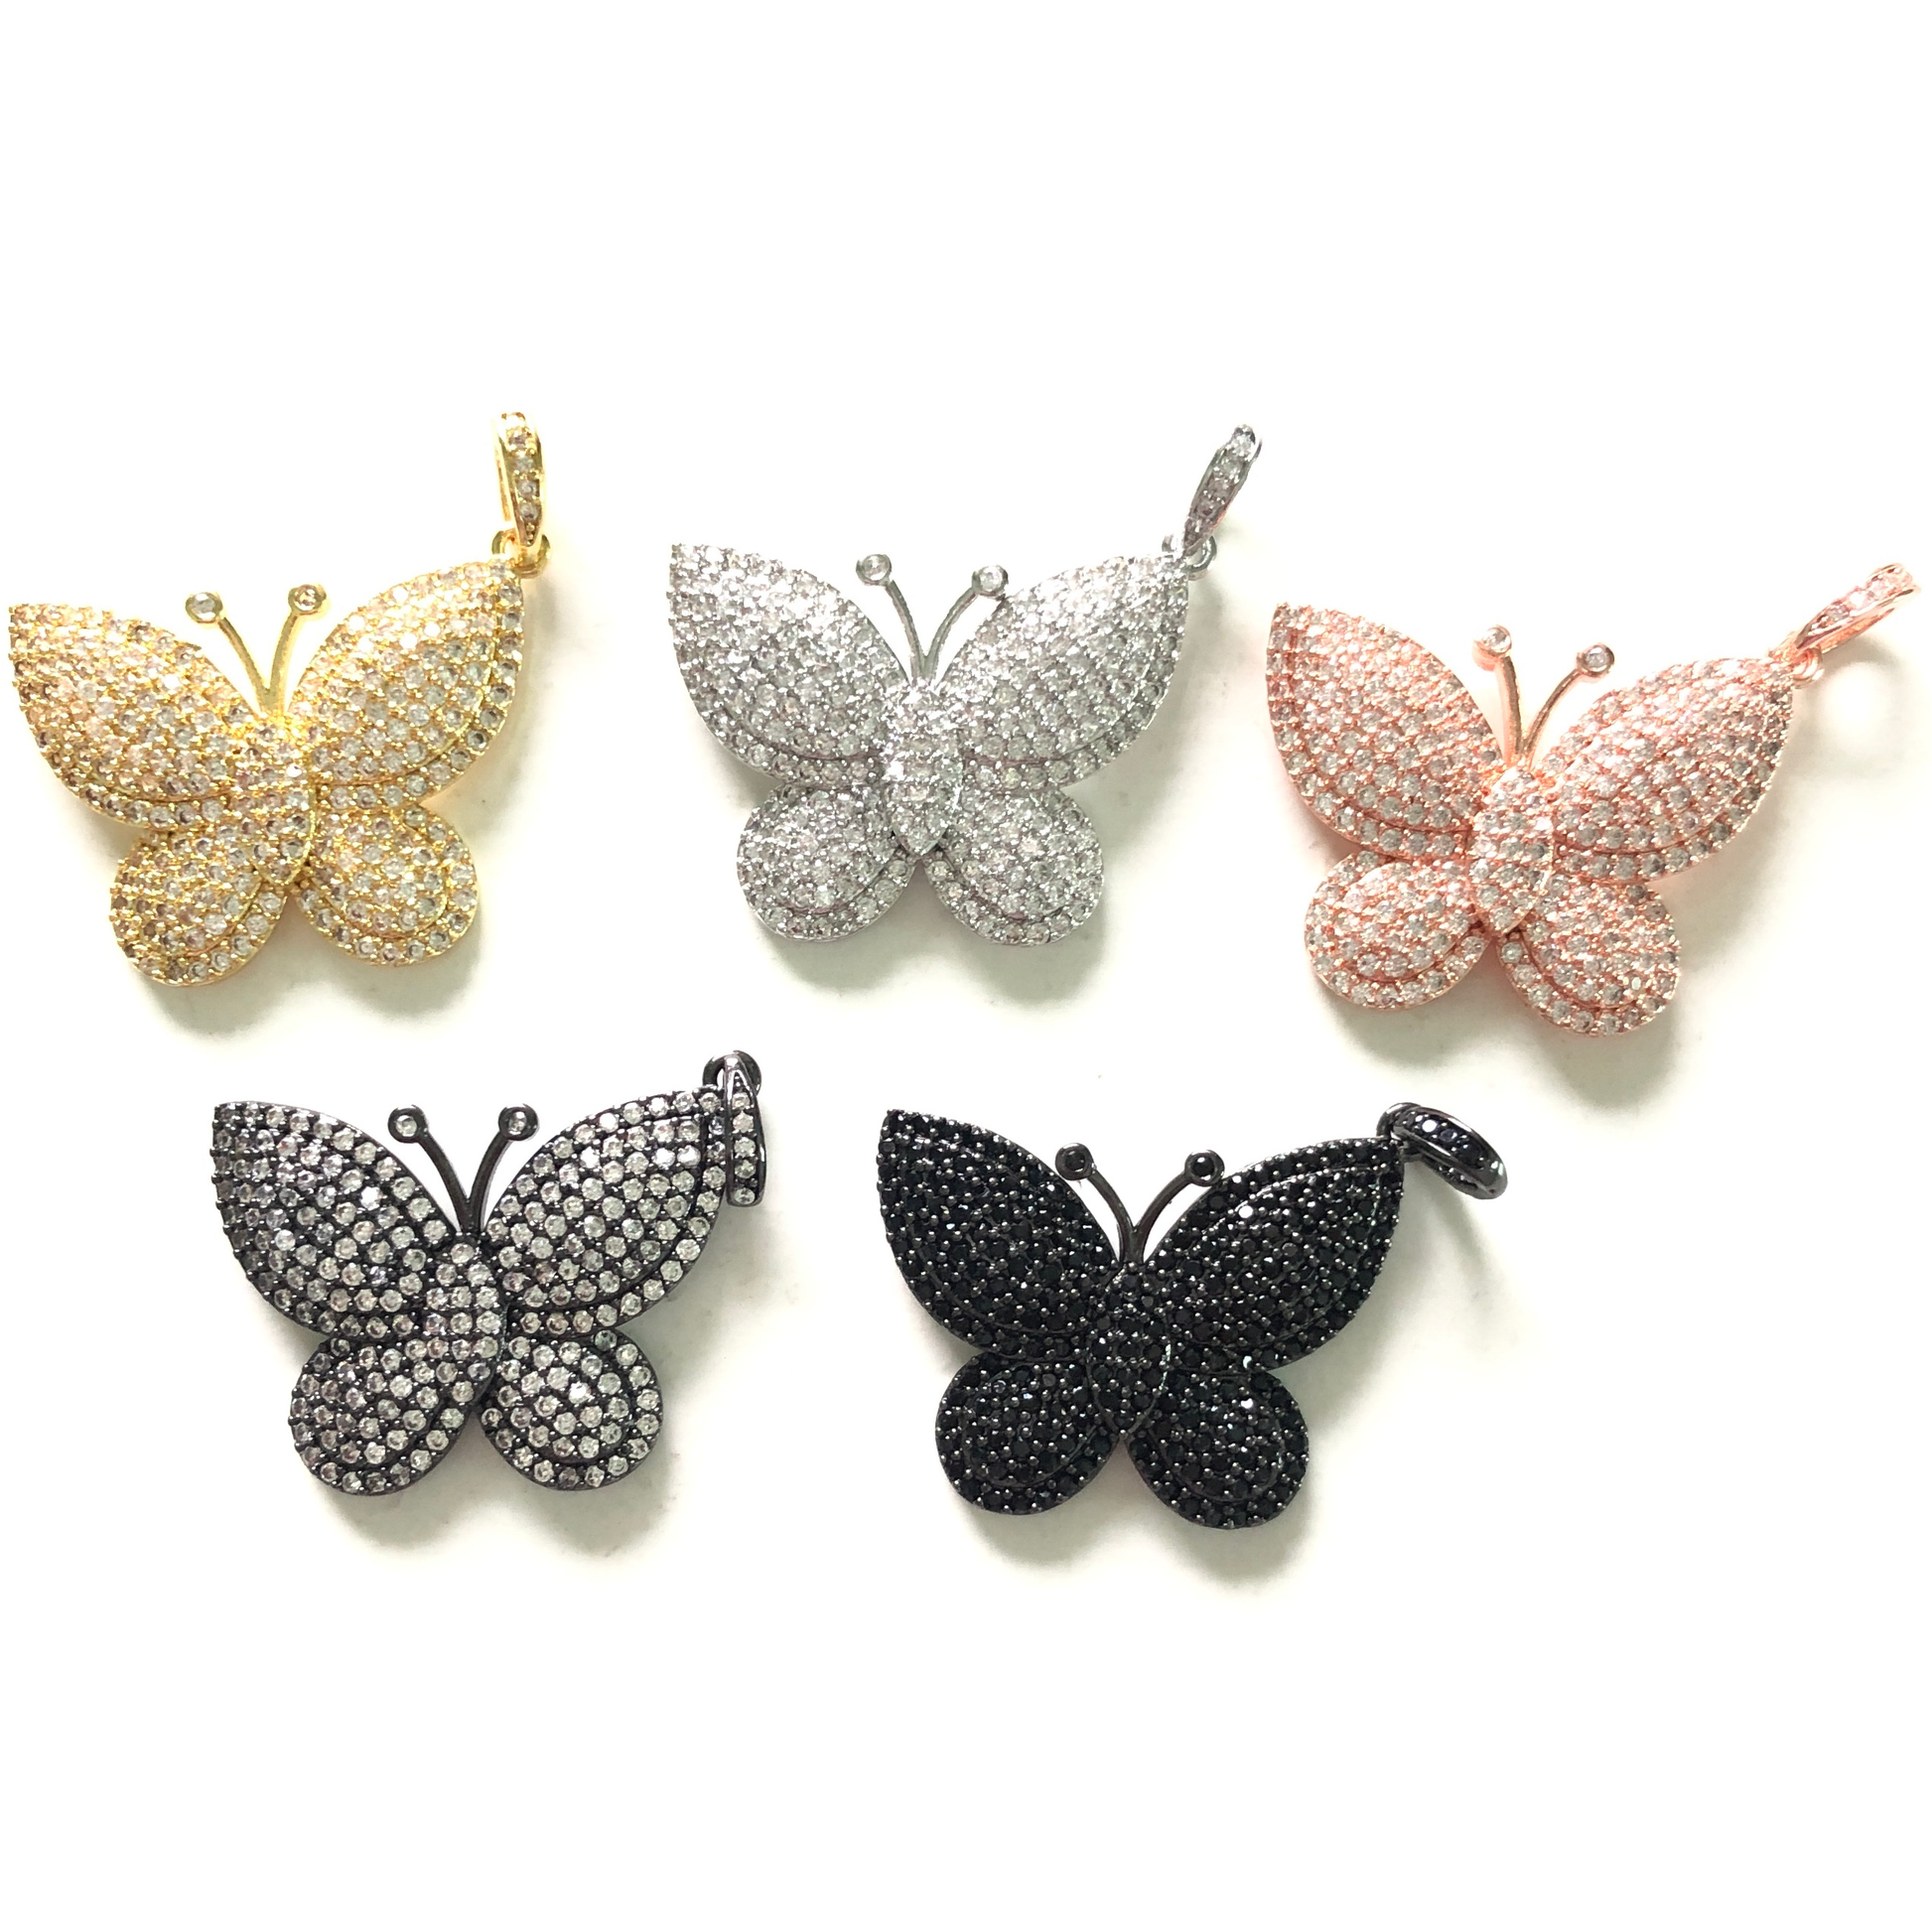 10pcs/lot 29.5*20mm CZ Paved Butterfly Charms CZ Paved Charms Butterflies On Sale Charms Beads Beyond